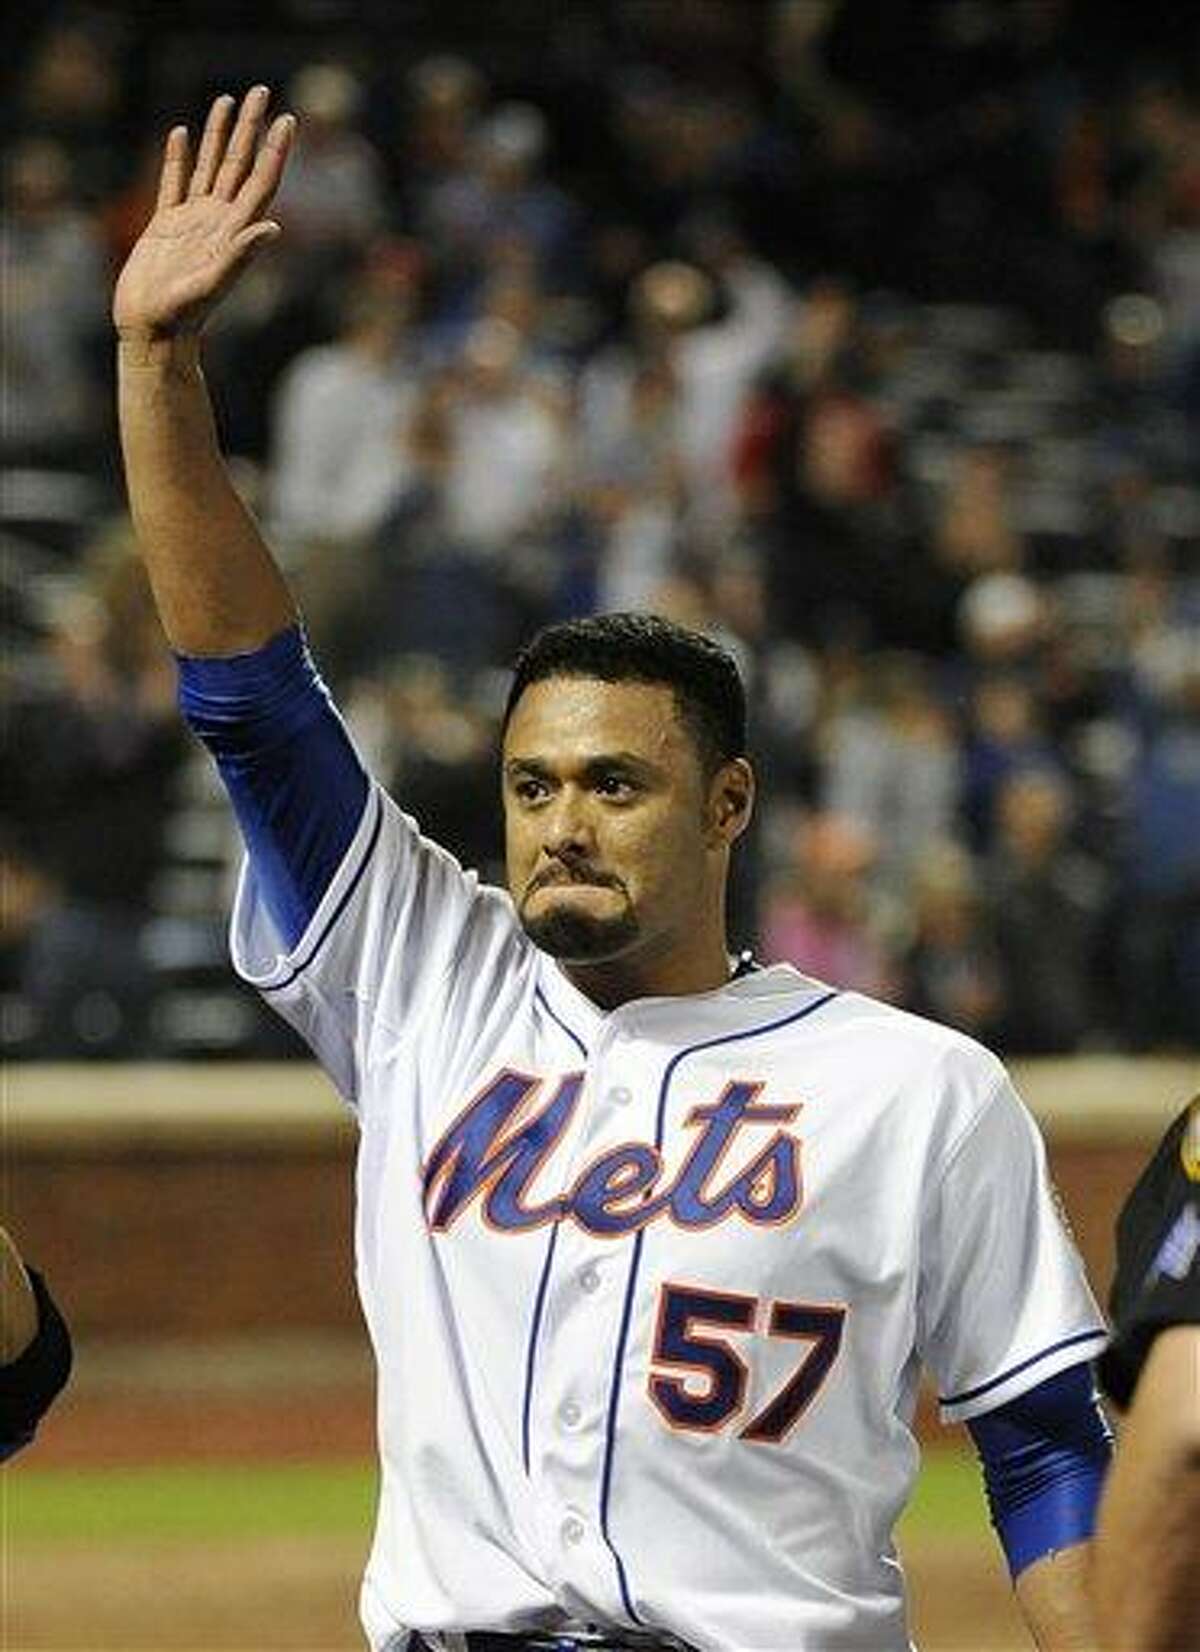 John Breunig: The day the Amazin' Mets came to CT